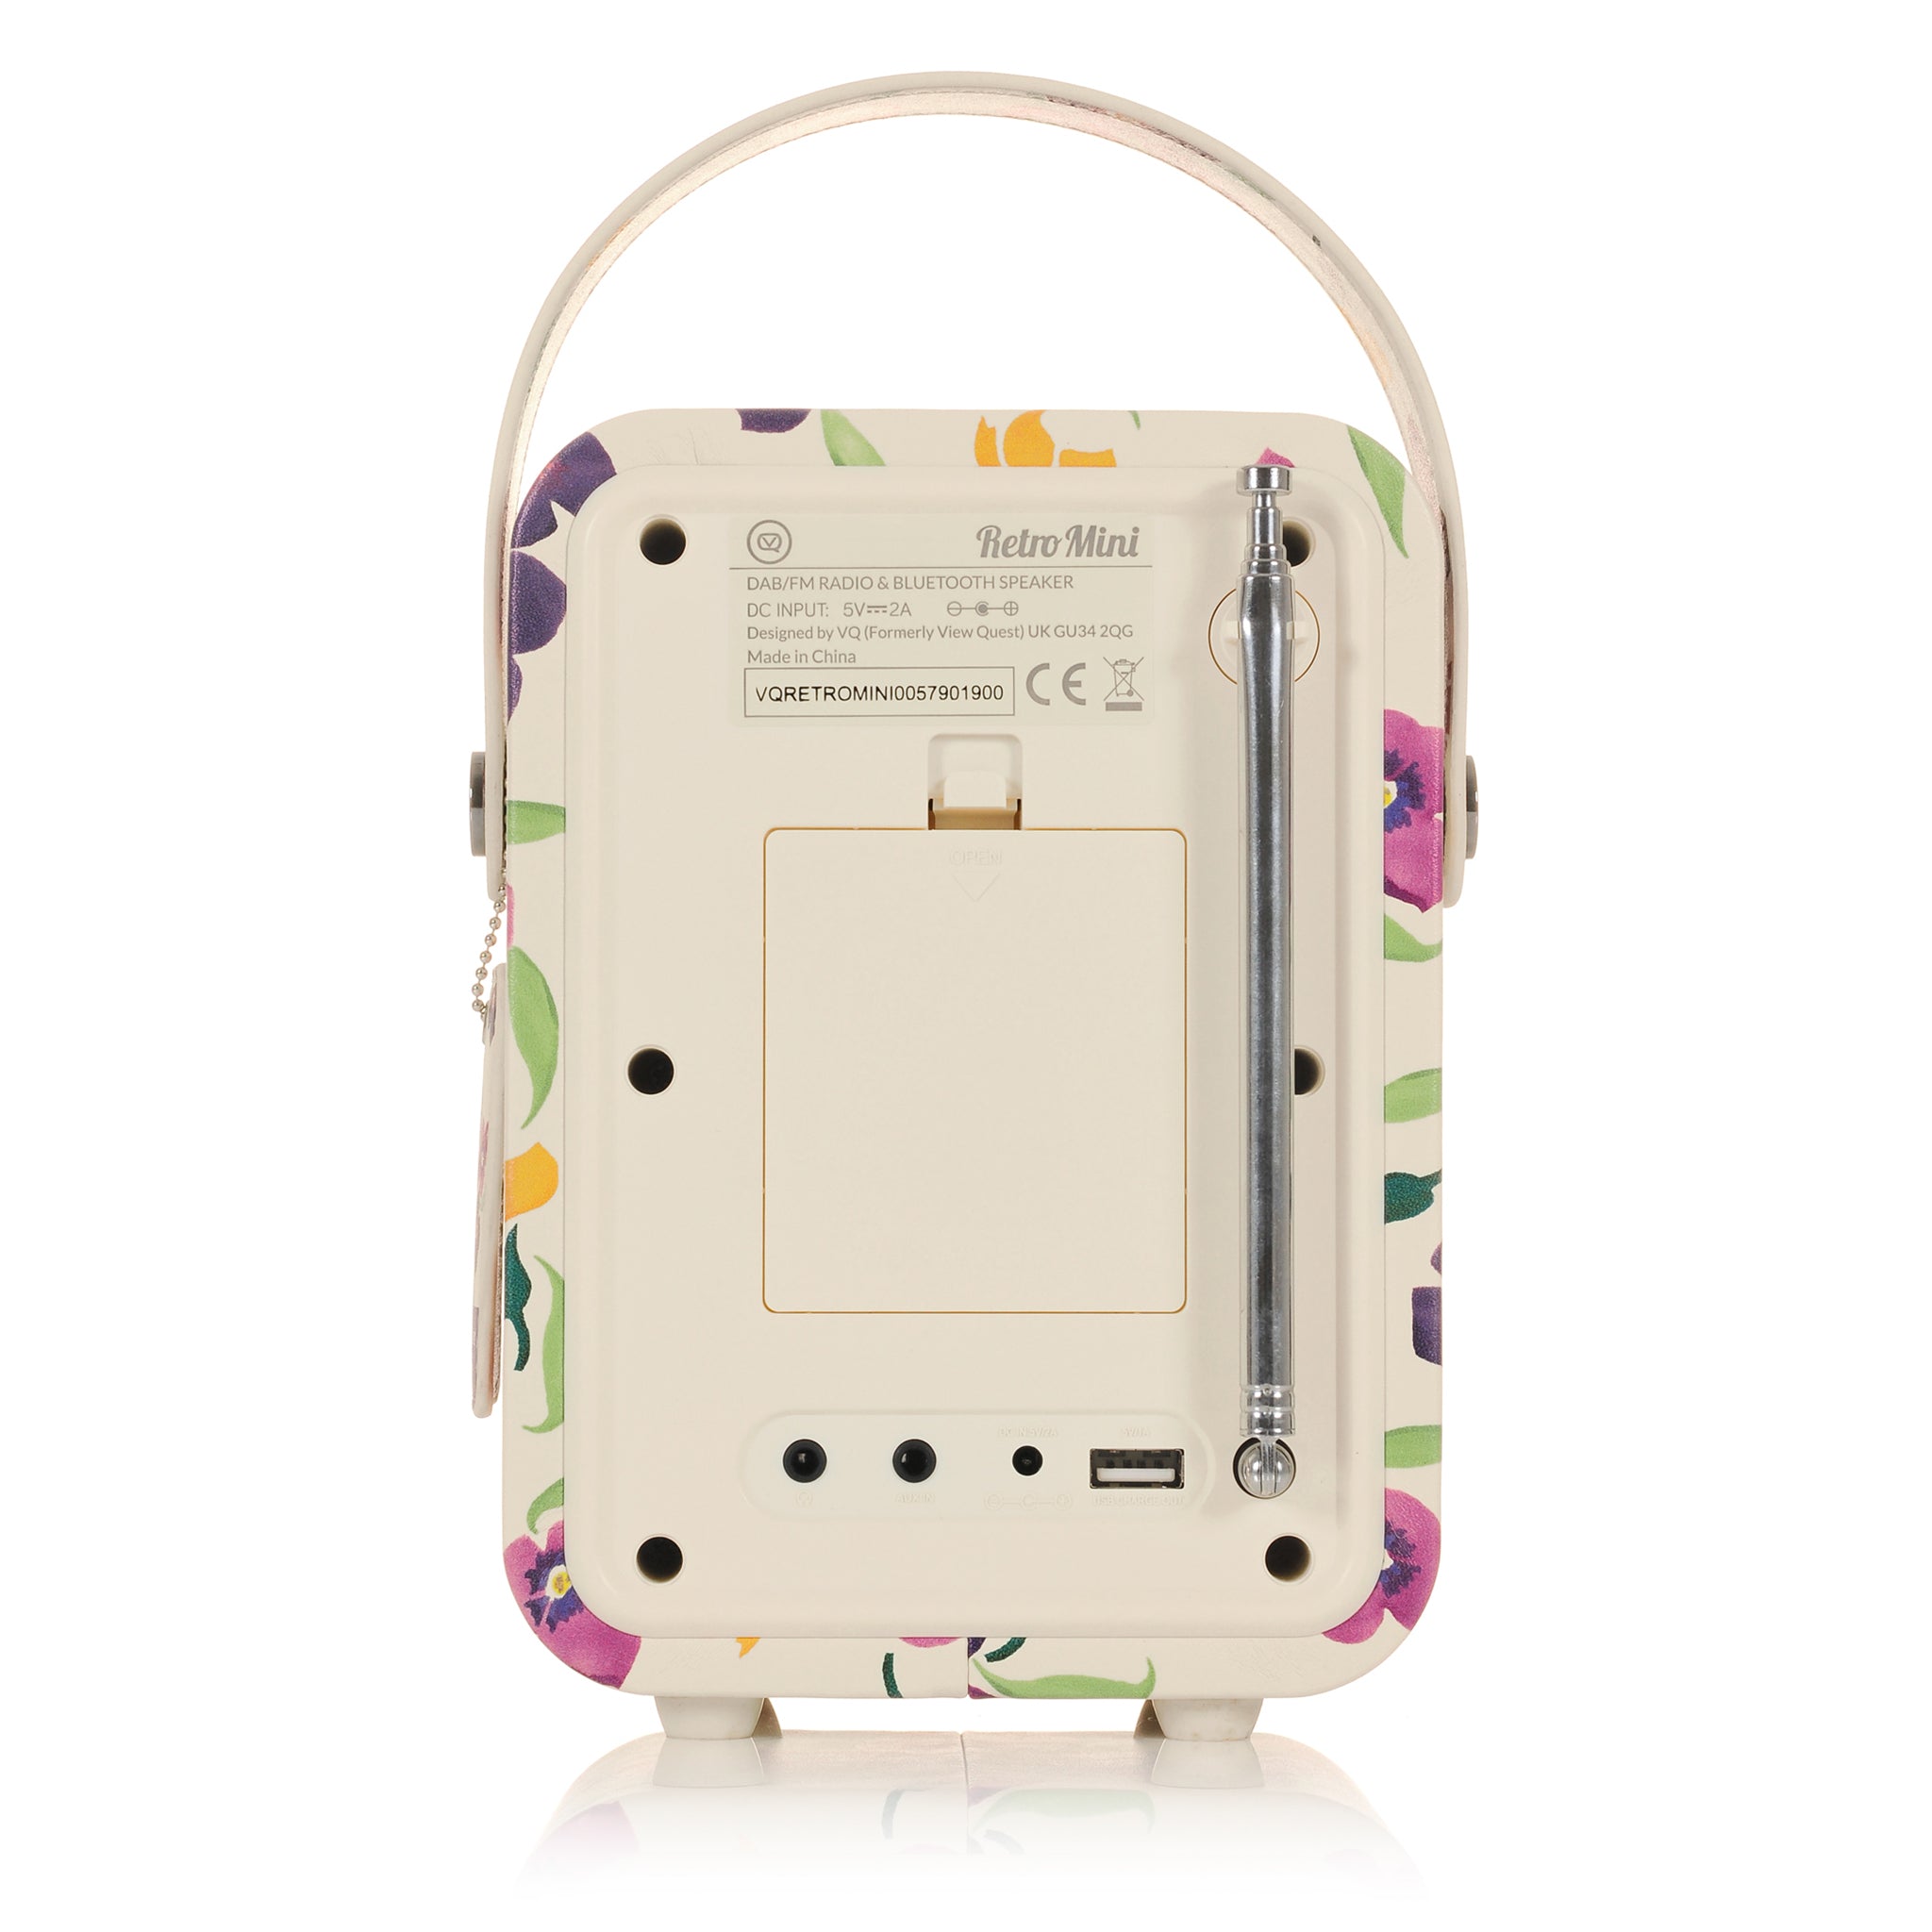 The Emma Bridgewater collection includes a range of stunning Digital Radios, all available in a wide range of patterns to perfectly complete your home.